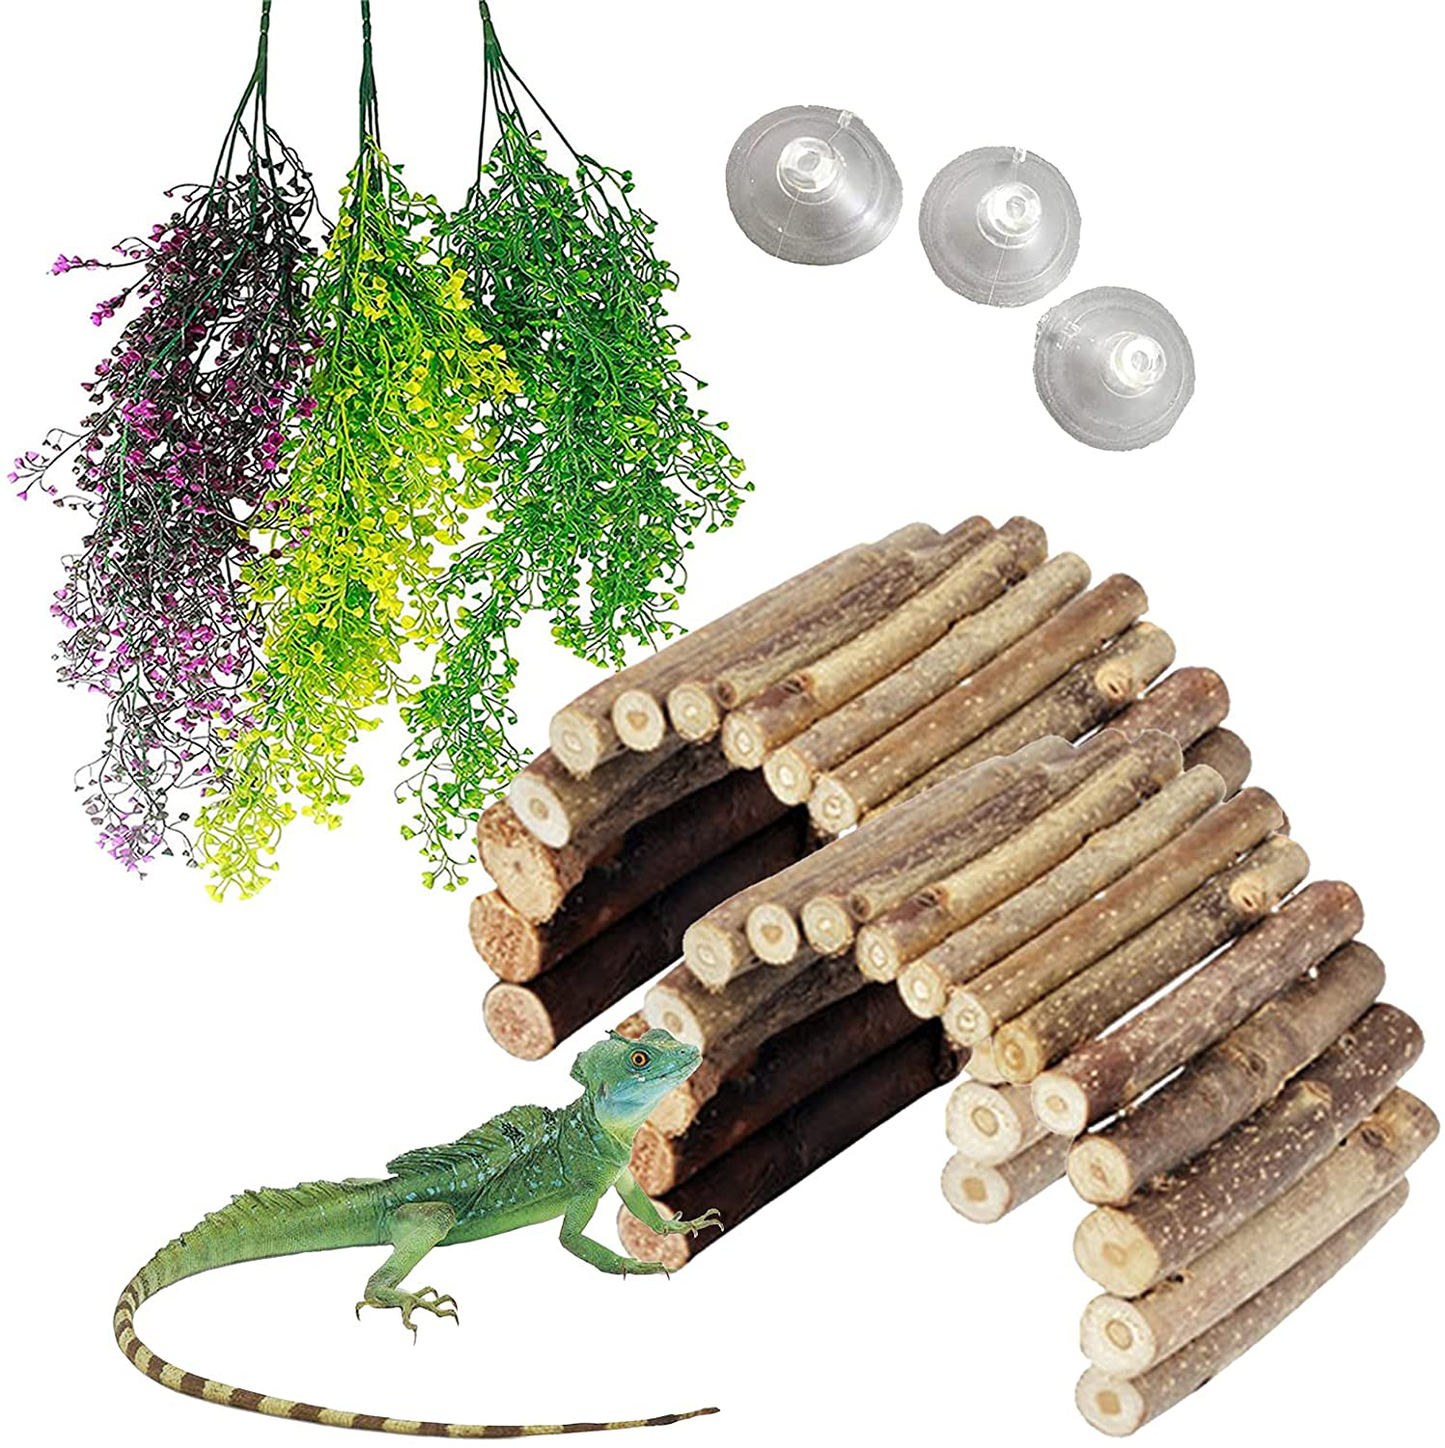 PINVNBY Reptile Soft Bendable Wooden Ladder Bridge Hideout Bearded Dragon Artificial Plastic Vines Plant with Suction Cup Cave Reptile Habitat Accessory for Lizard Bearded Dragon Gecko Chameleon Snake